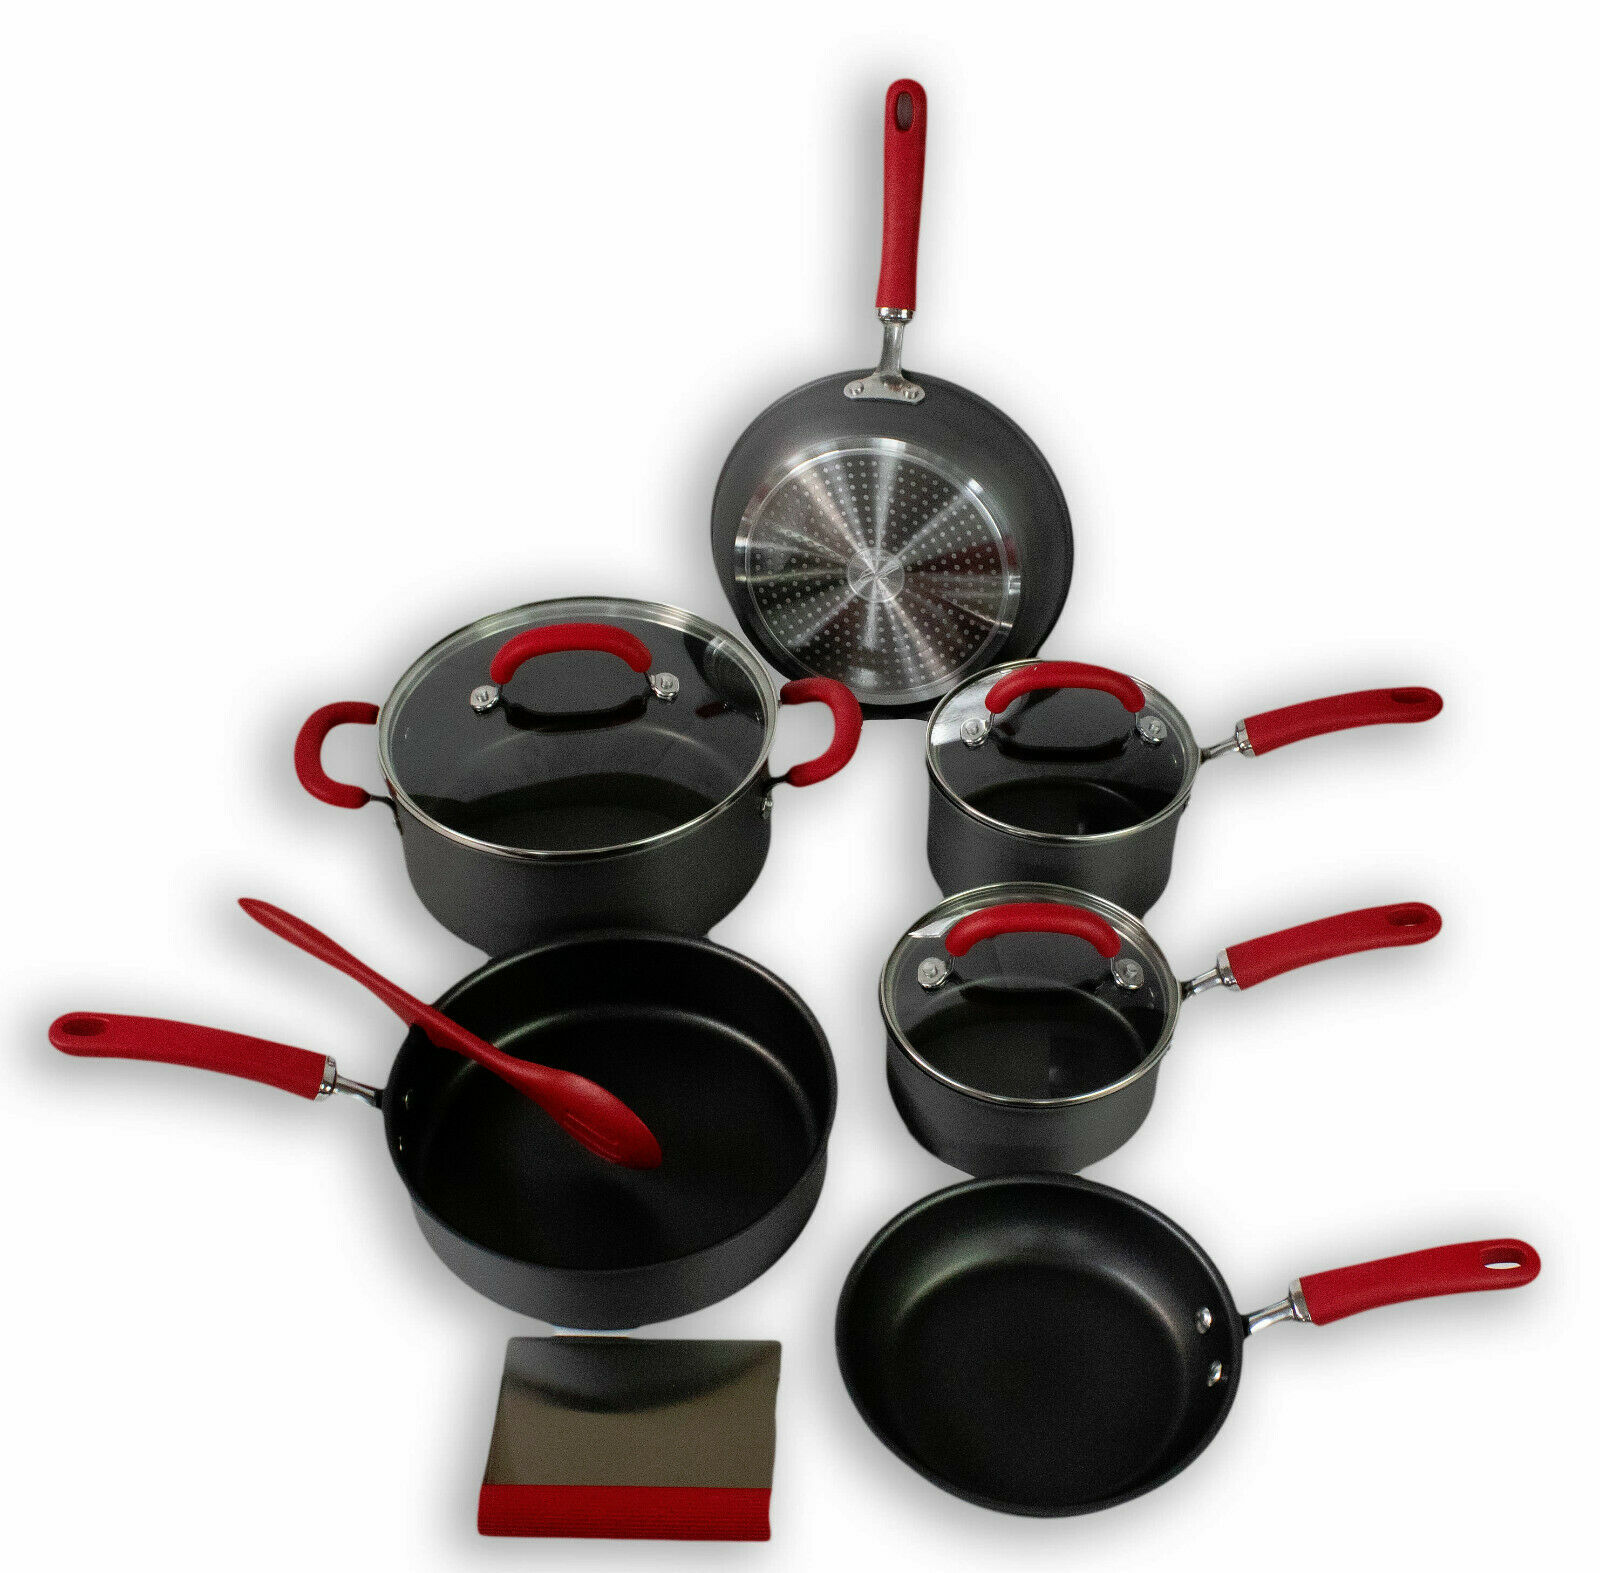 Rachael Ray Create Delicious Hard Anodized Nonstick Cookware Pots and Pans Set